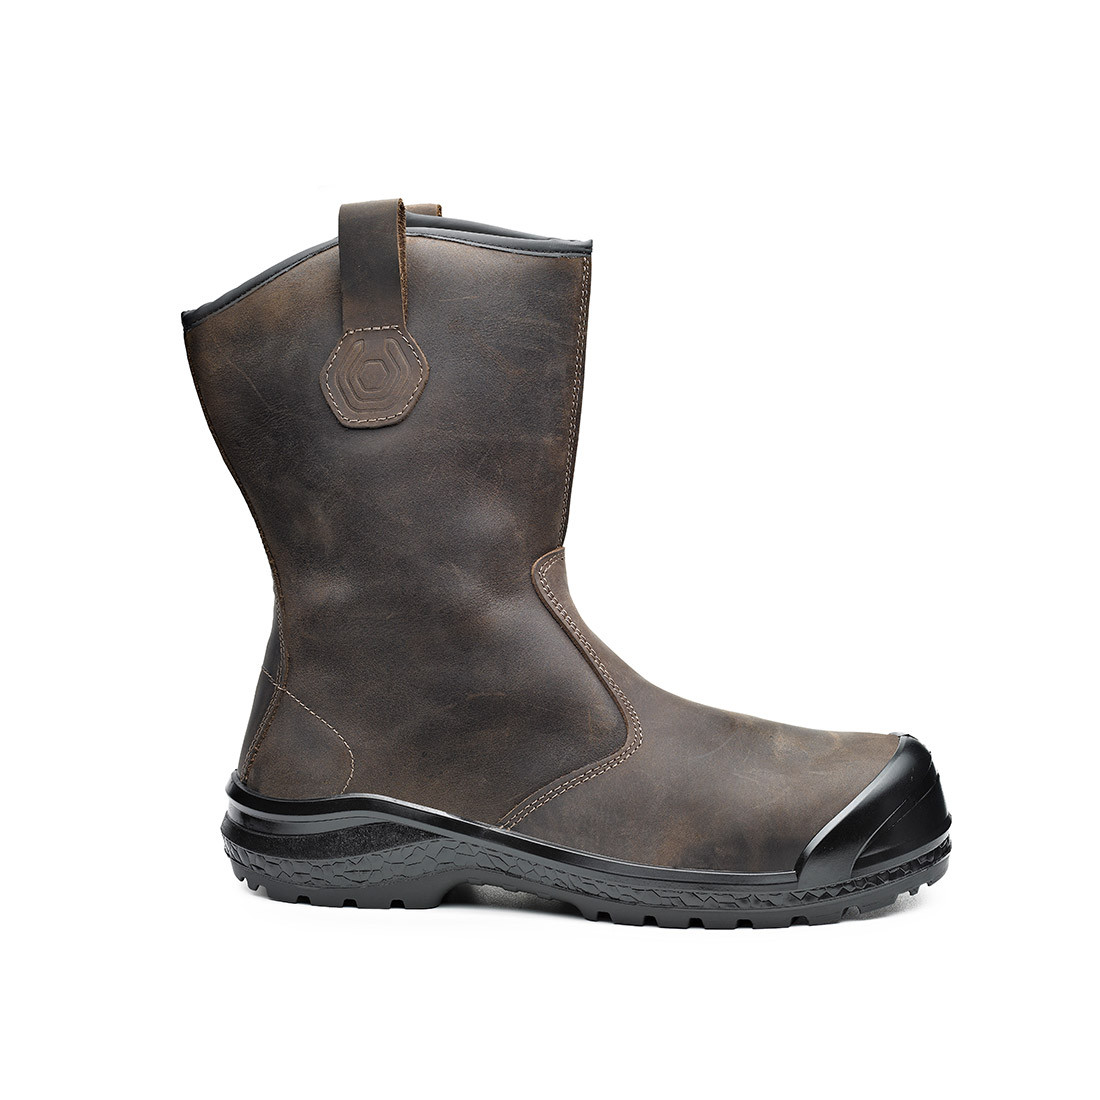 Be-Extreme Winter Boot S3 CI - Les chaussures de protection